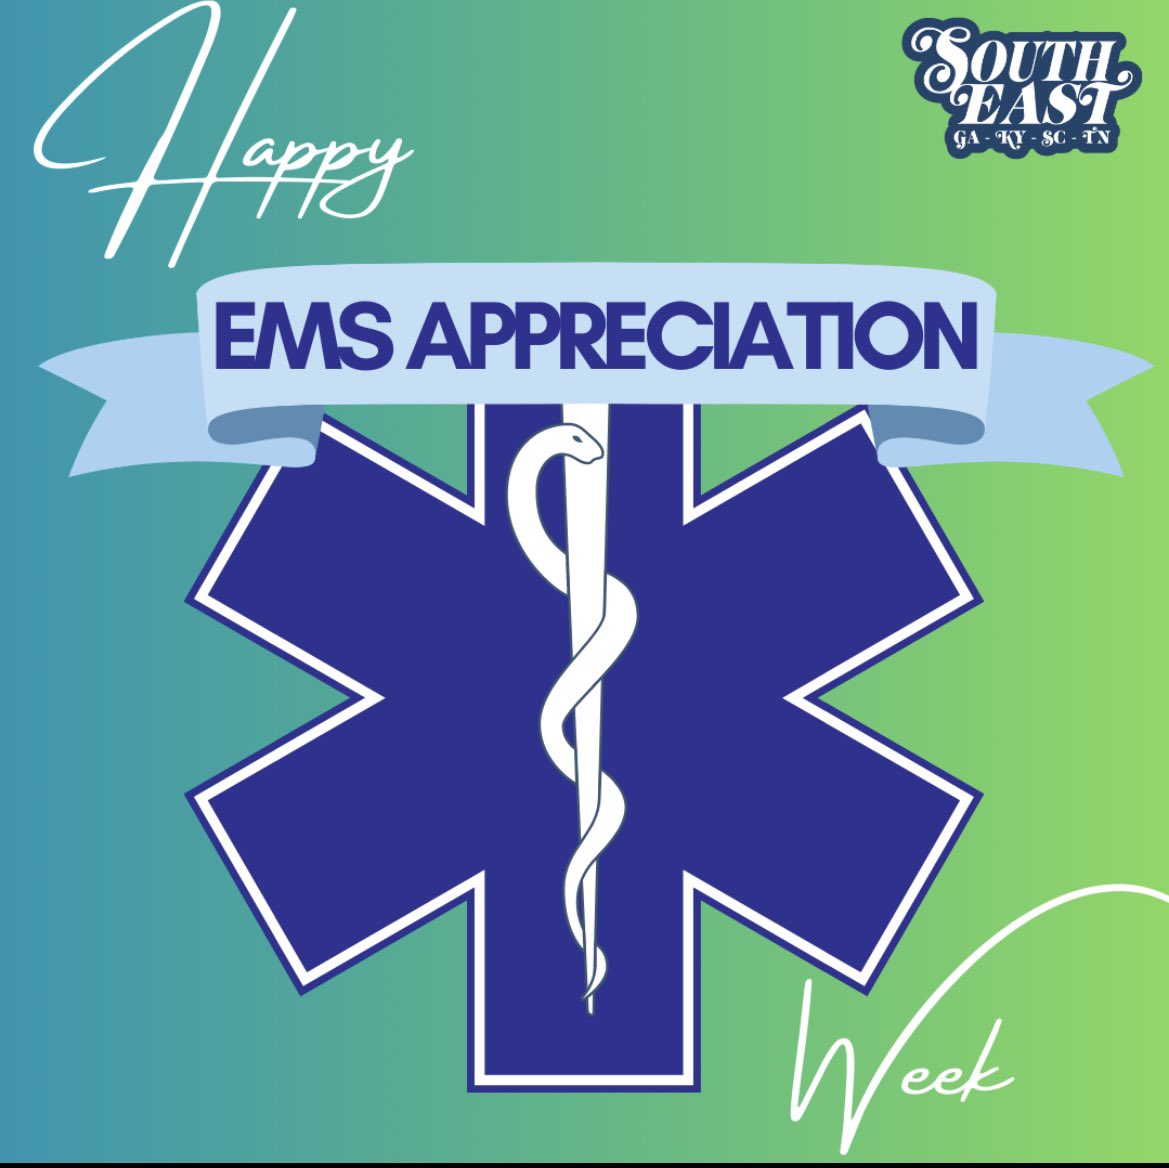 Calling all heroes in green! 🚑💚 It's National EMS Appreciation Week, and we're giving a big shoutout to our incredible EMS providers who save lives and keep us safe every day. From the bottom of our hearts, thank you for being the superheroes you are! 🦸‍♂️🦸‍♀️❤️ #EMSWeek #EMSStrong